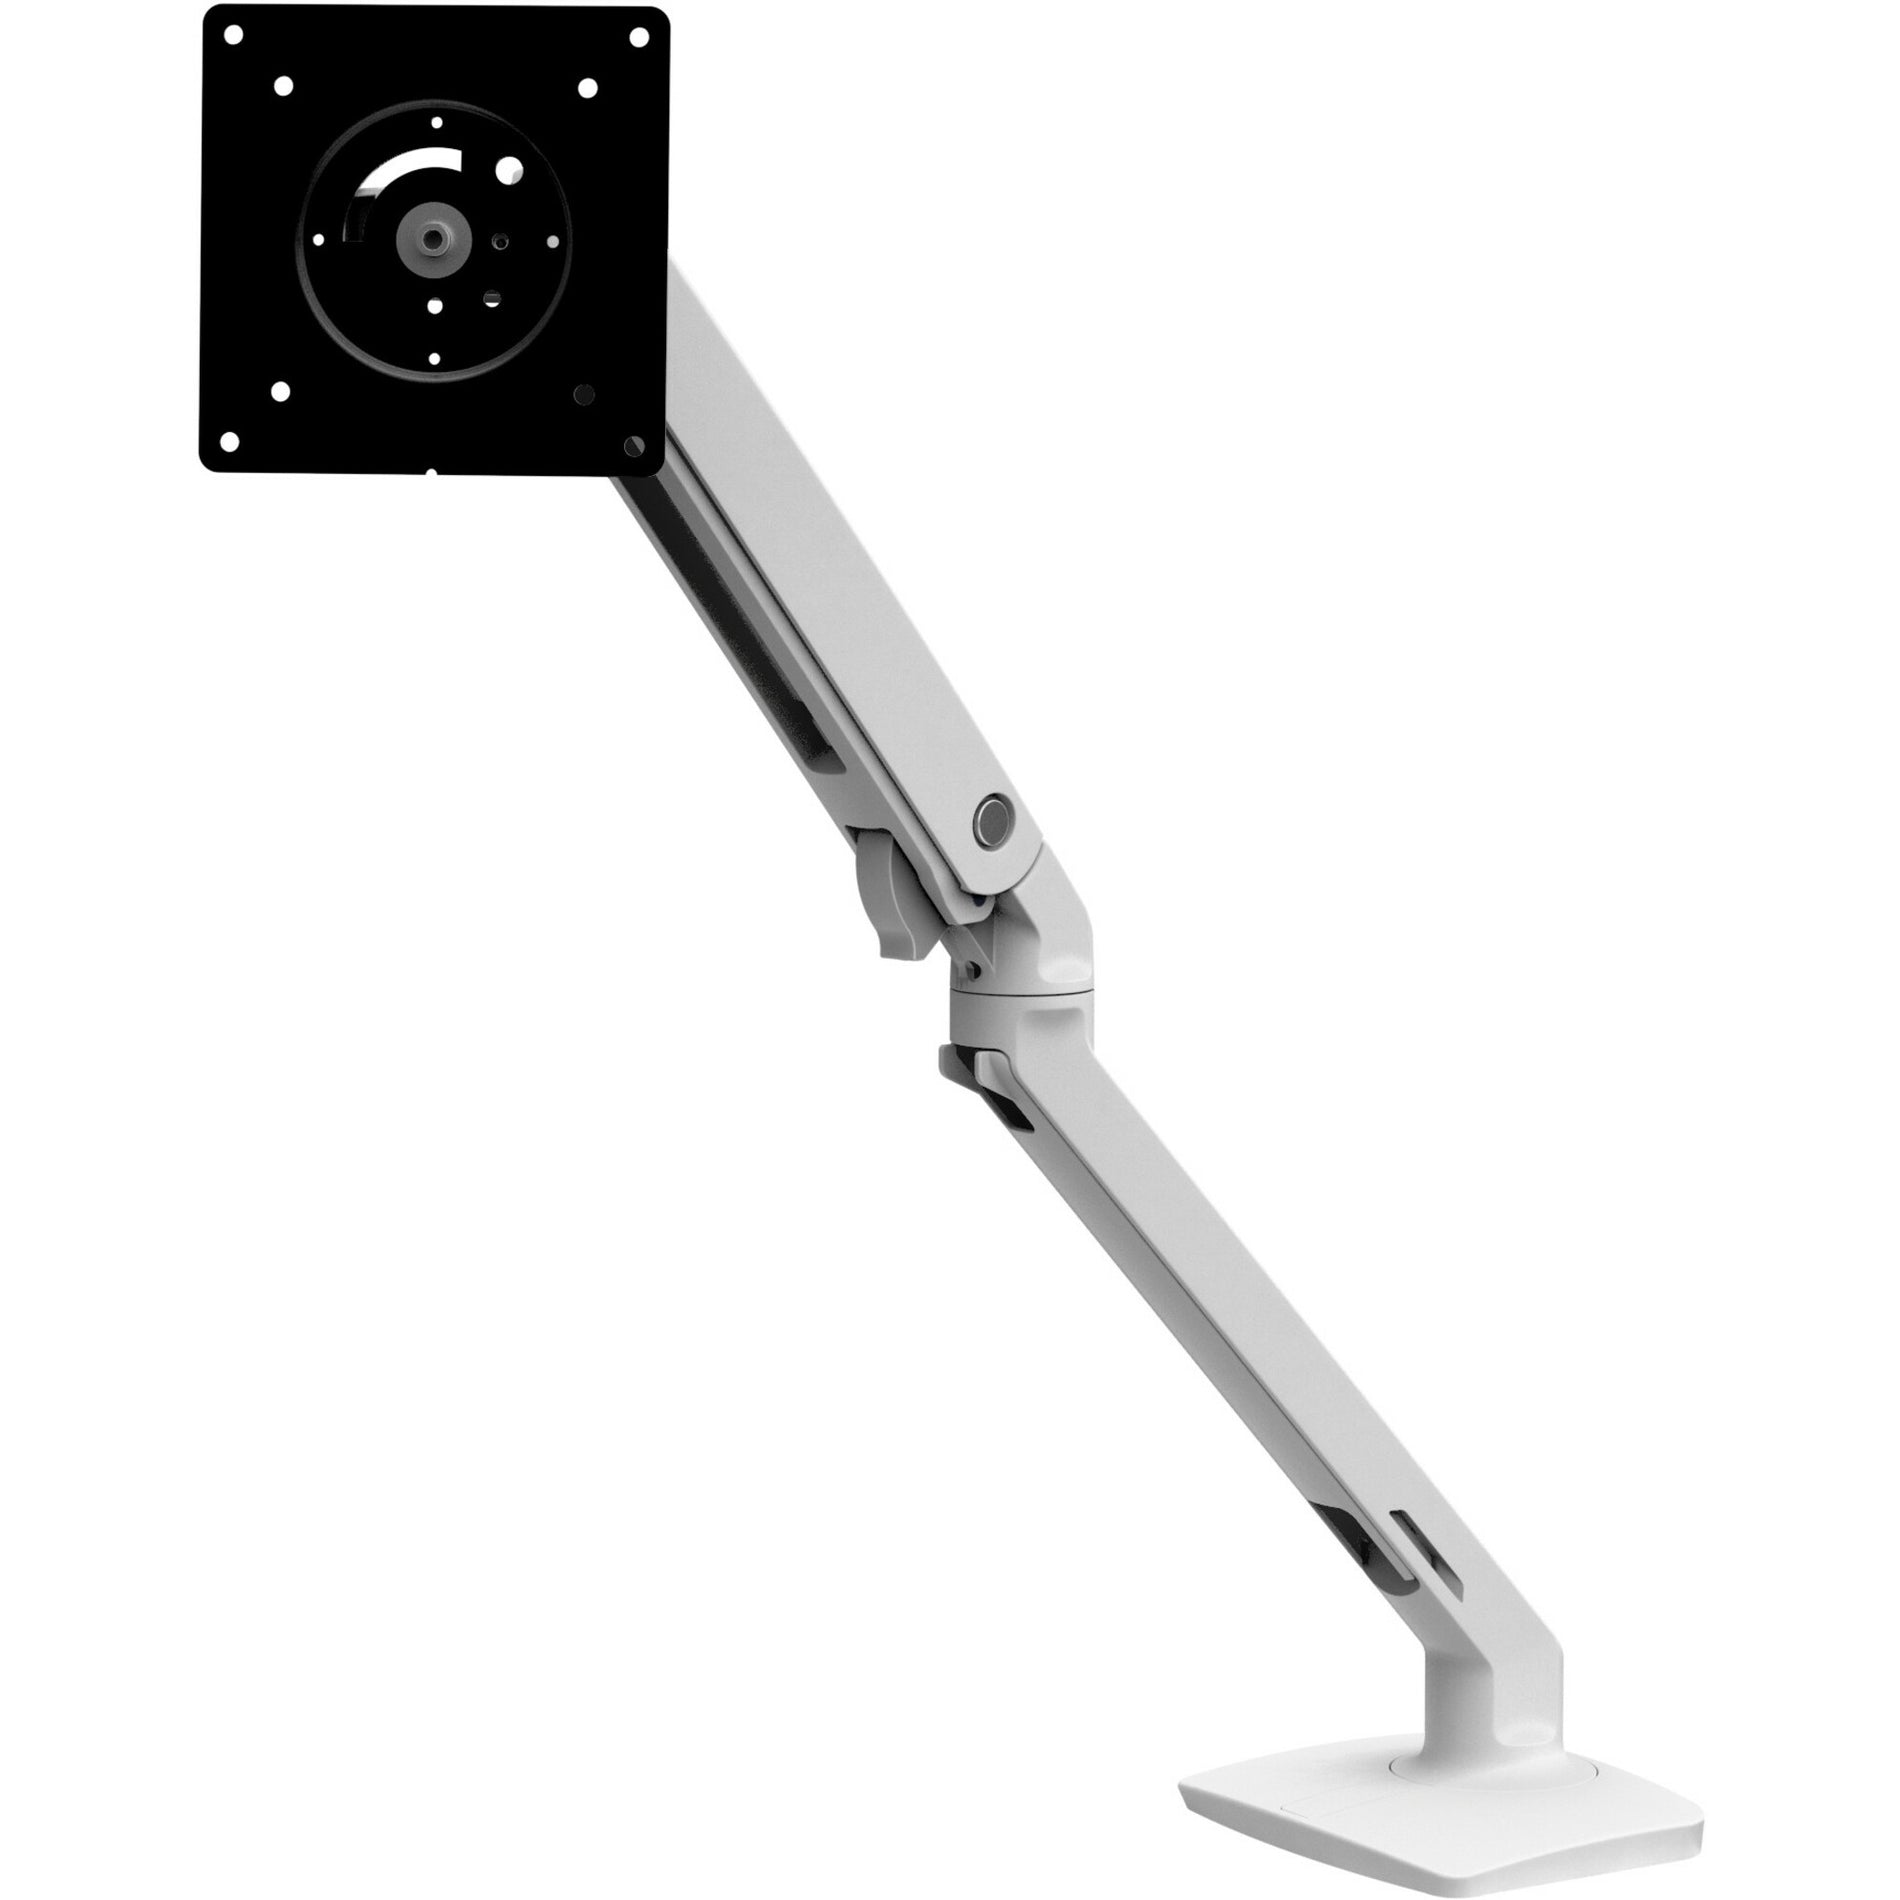 Ergotron 45-508-216 MXV Desk Monitor Arm with Under Mount C-Clamp, White - Supports 1 Monitor, 20 lb Maximum Load Capacity, 34" Maximum Screen Size